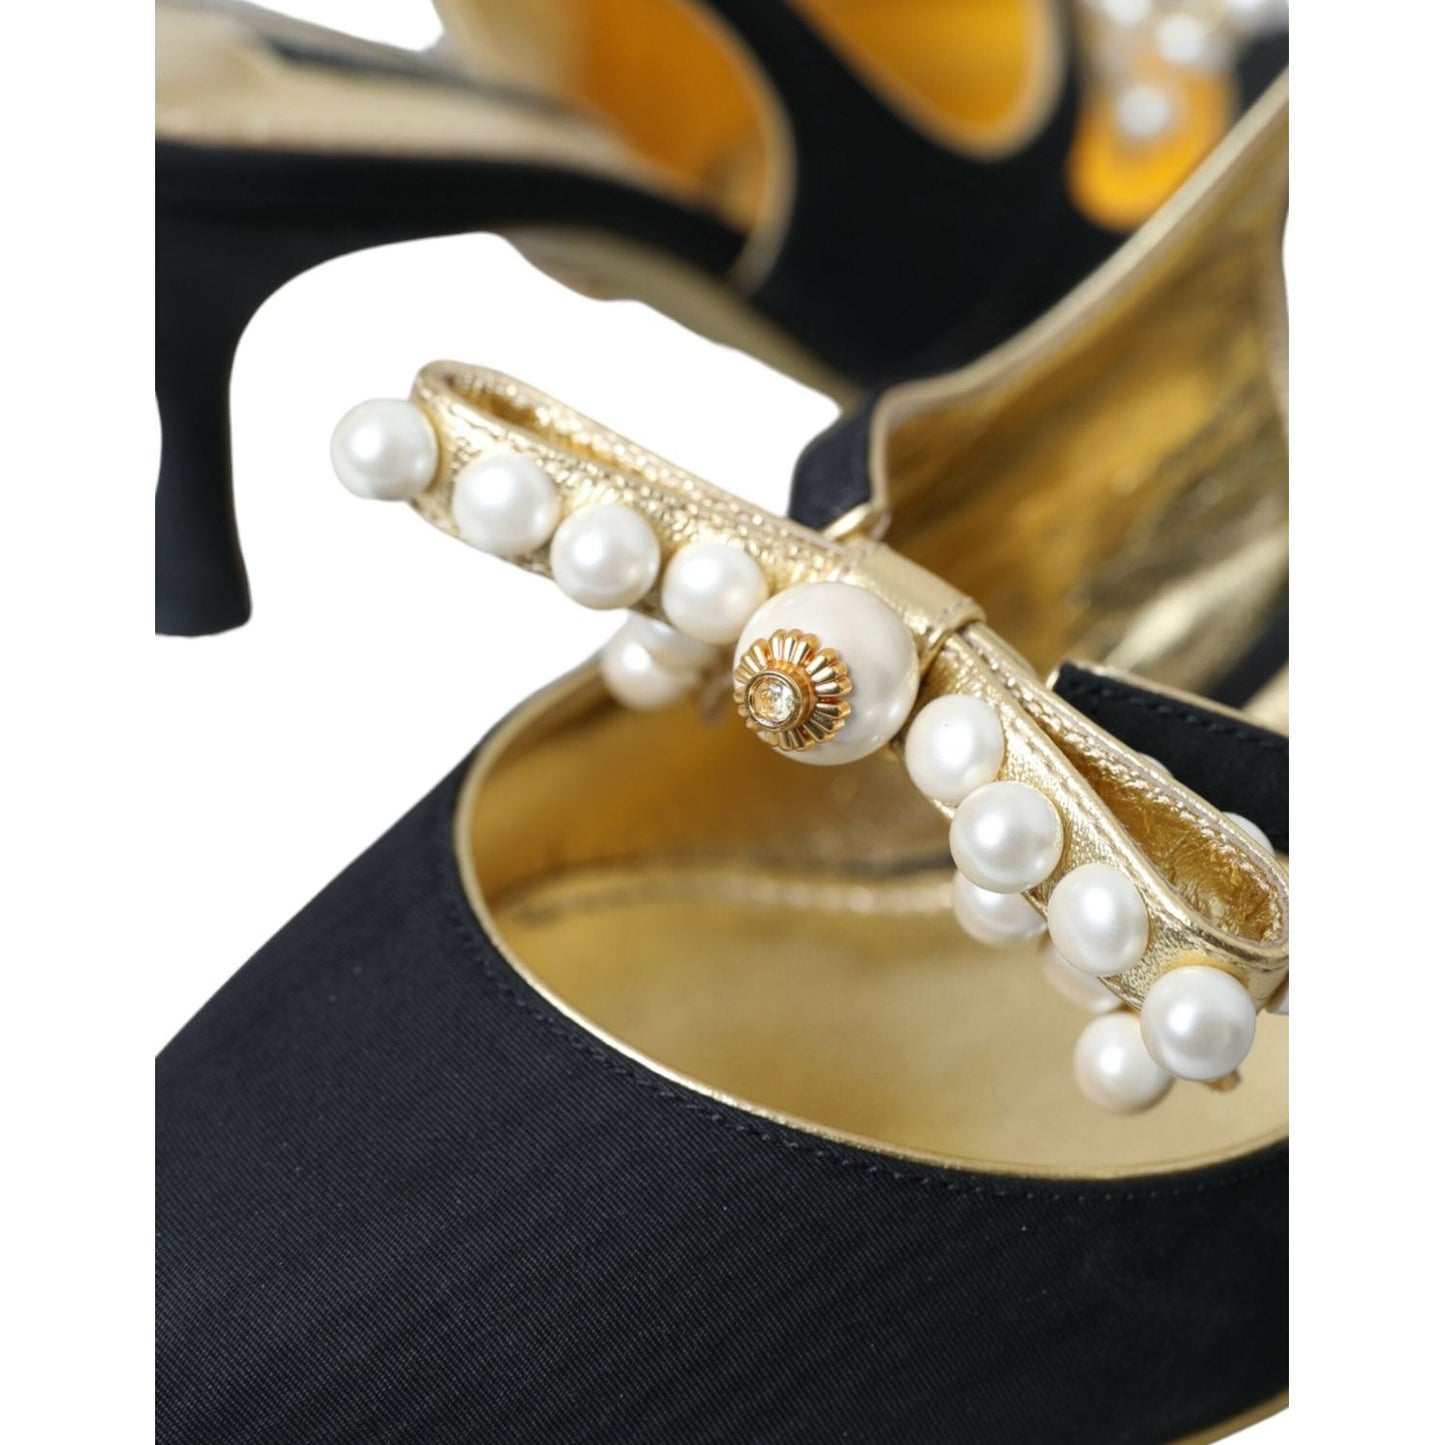 Dolce & Gabbana Black Leather Faux Pearls Slingbacks Shoes black-leather-faux-pearls-slingbacks-shoes